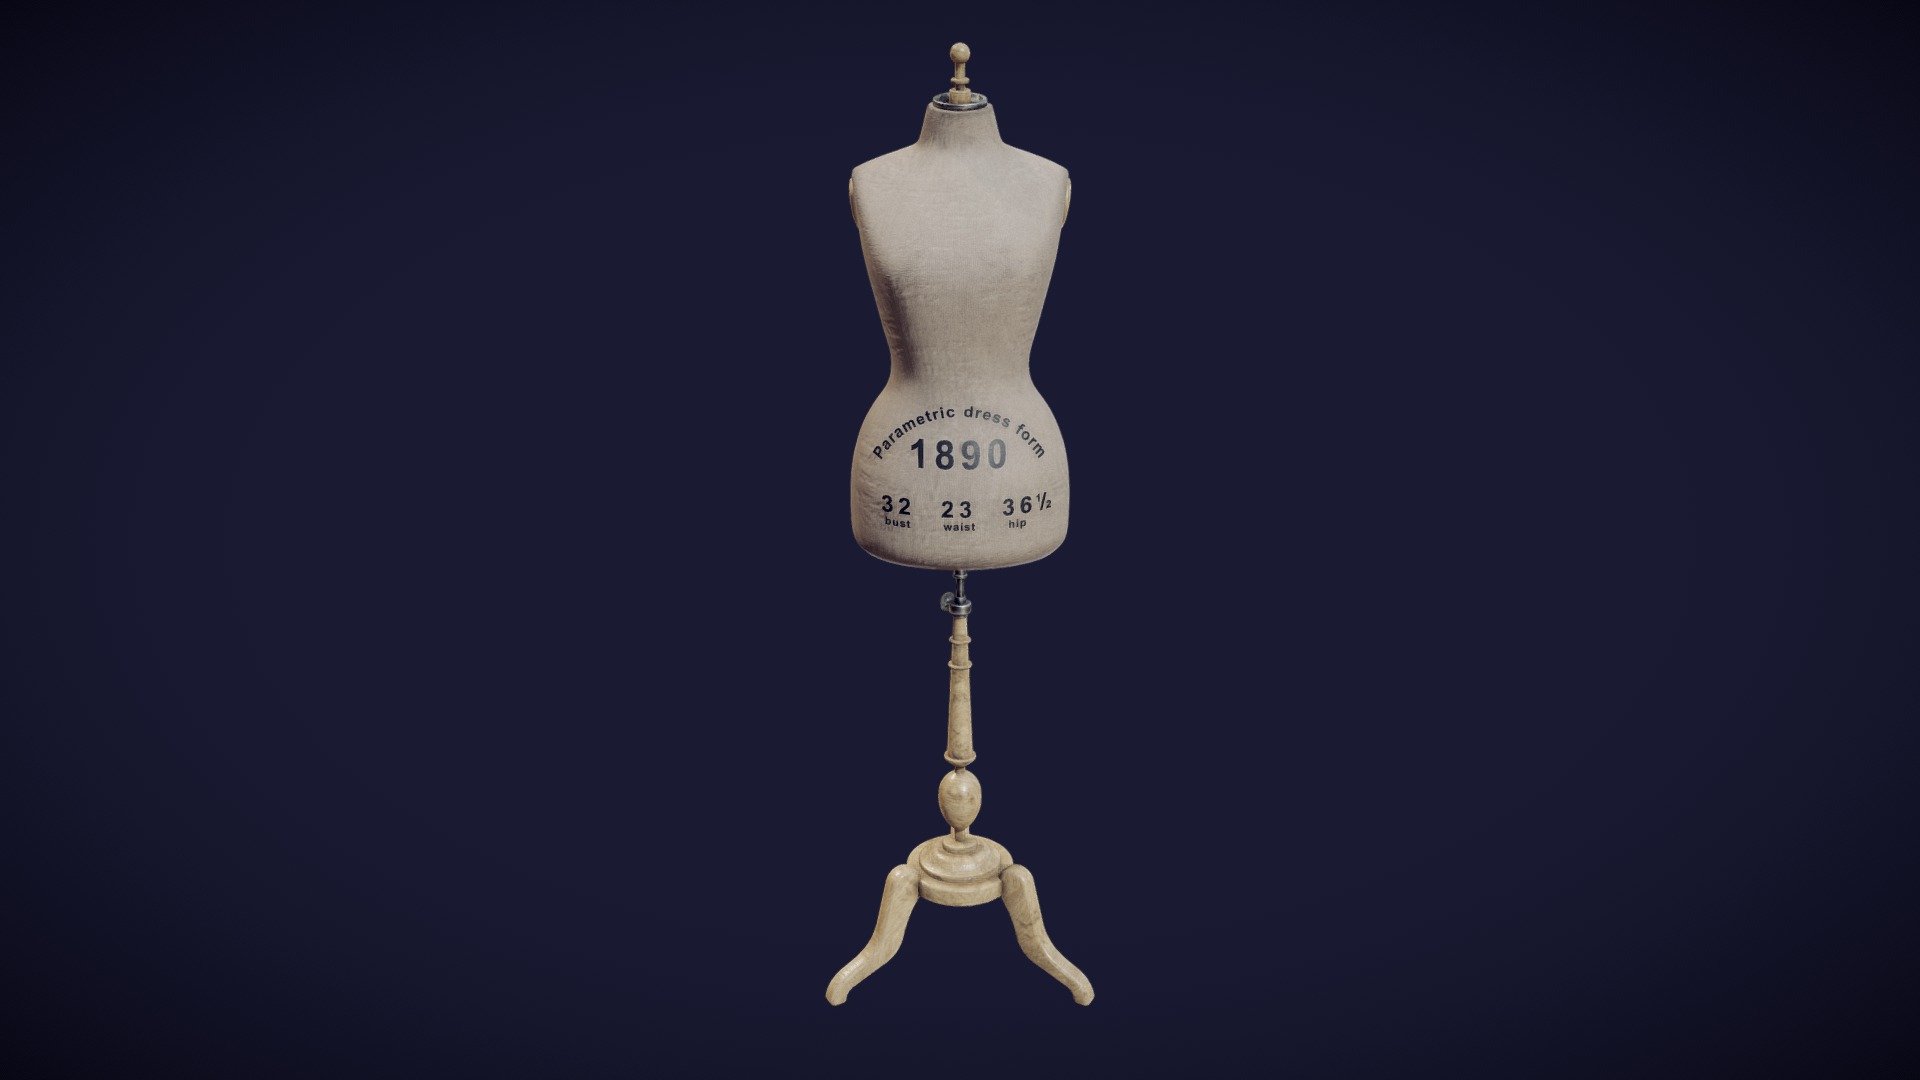 The 3D model presents a historical mannequin (a dress form) dating to 1890. The virtual mannequin was generated automatically by using a new method of parametric modelling (for further details see https://doi.org/10.1108/IJCST-06-2019-0093). The values of body measurements were taken from a sizing table published in “The Cutters Practical Guide to the Cutting of Ladies’ Garments” (V.D.F. Vincent, 1890). The measurements of the mannequin are: bust – 32 inches; waist – 23 inches; hip – 36.5 inches. The authors of the 3D model are

Aleksei Moskvin https://independent.academia.edu/AlekseiMoskvin

Mariia Moskvina https://independent.academia.edu/MariiaMoskvina

(Saint Petersburg State University of Industrial Technologies and Design)

DOI: http://dx.doi.org/10.13140/RG.2.2.36396.18569
https://www.researchgate.net/publication/357168466_1890_dress_form_size_32

The authors thank scientists from Ivanovo State Polytechnic University for providing information on historical mannequins 3d model